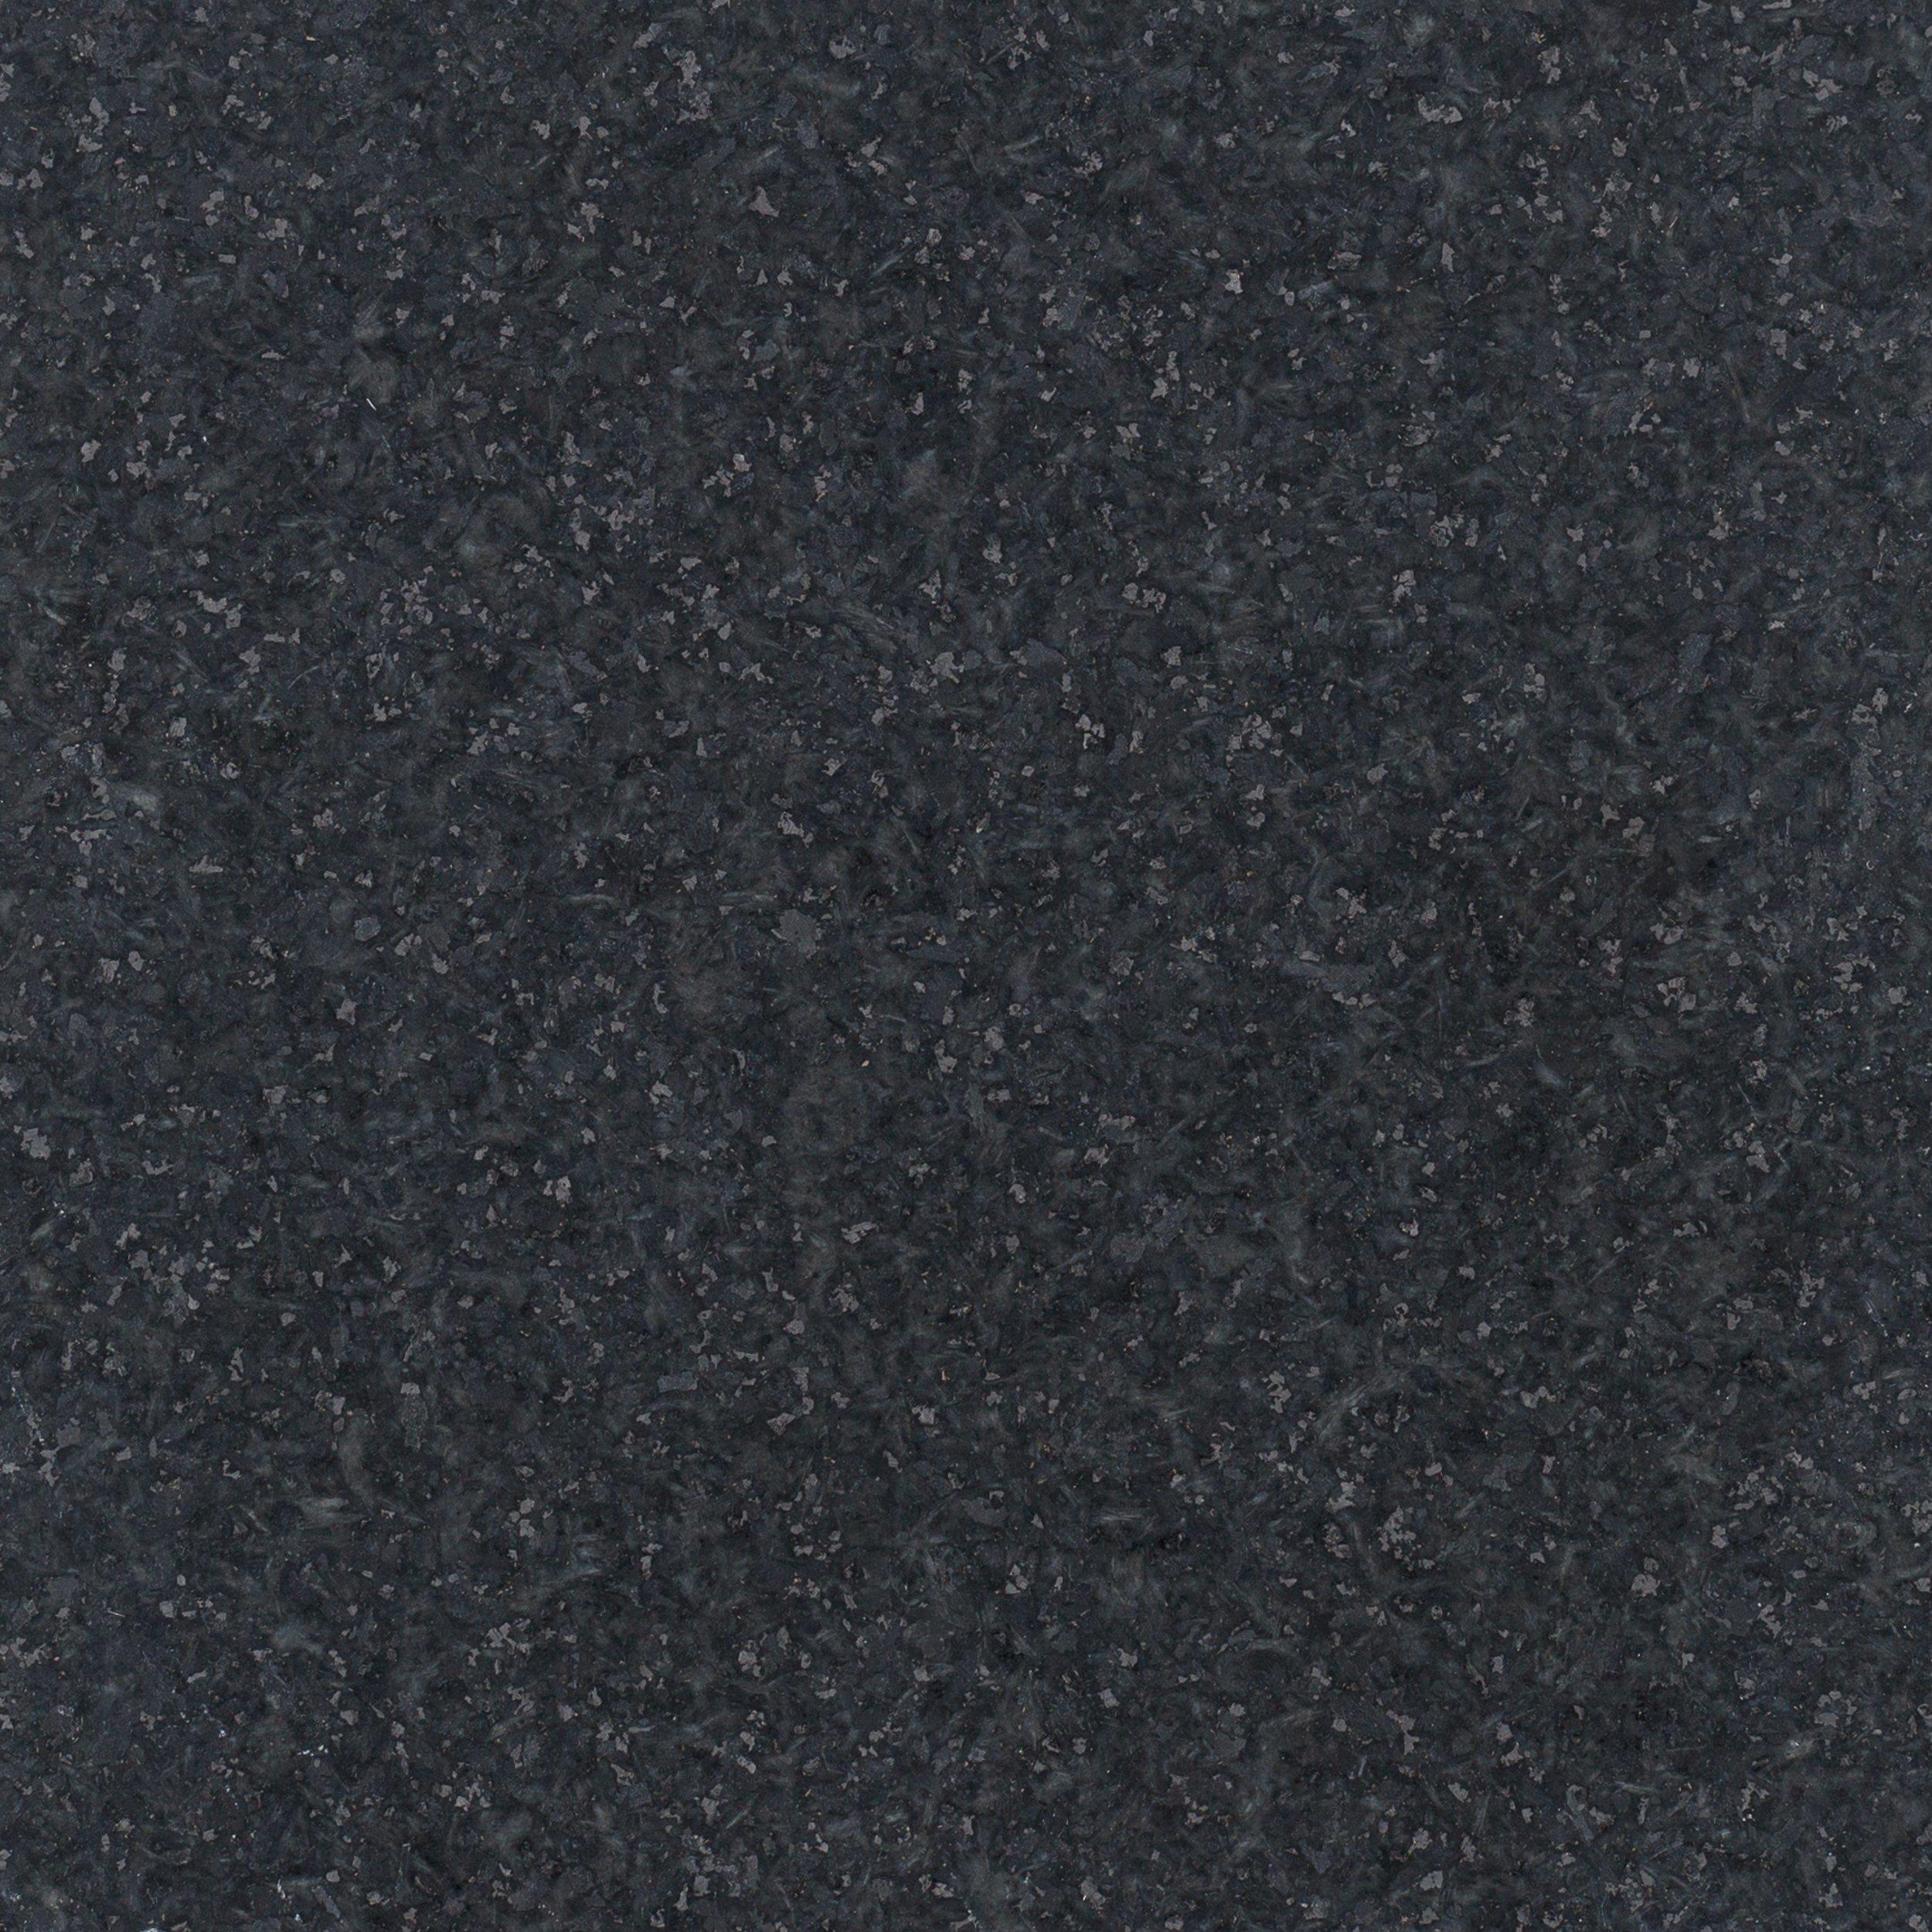 Ready To Install Absolute Black Honed Granite Slab Includes